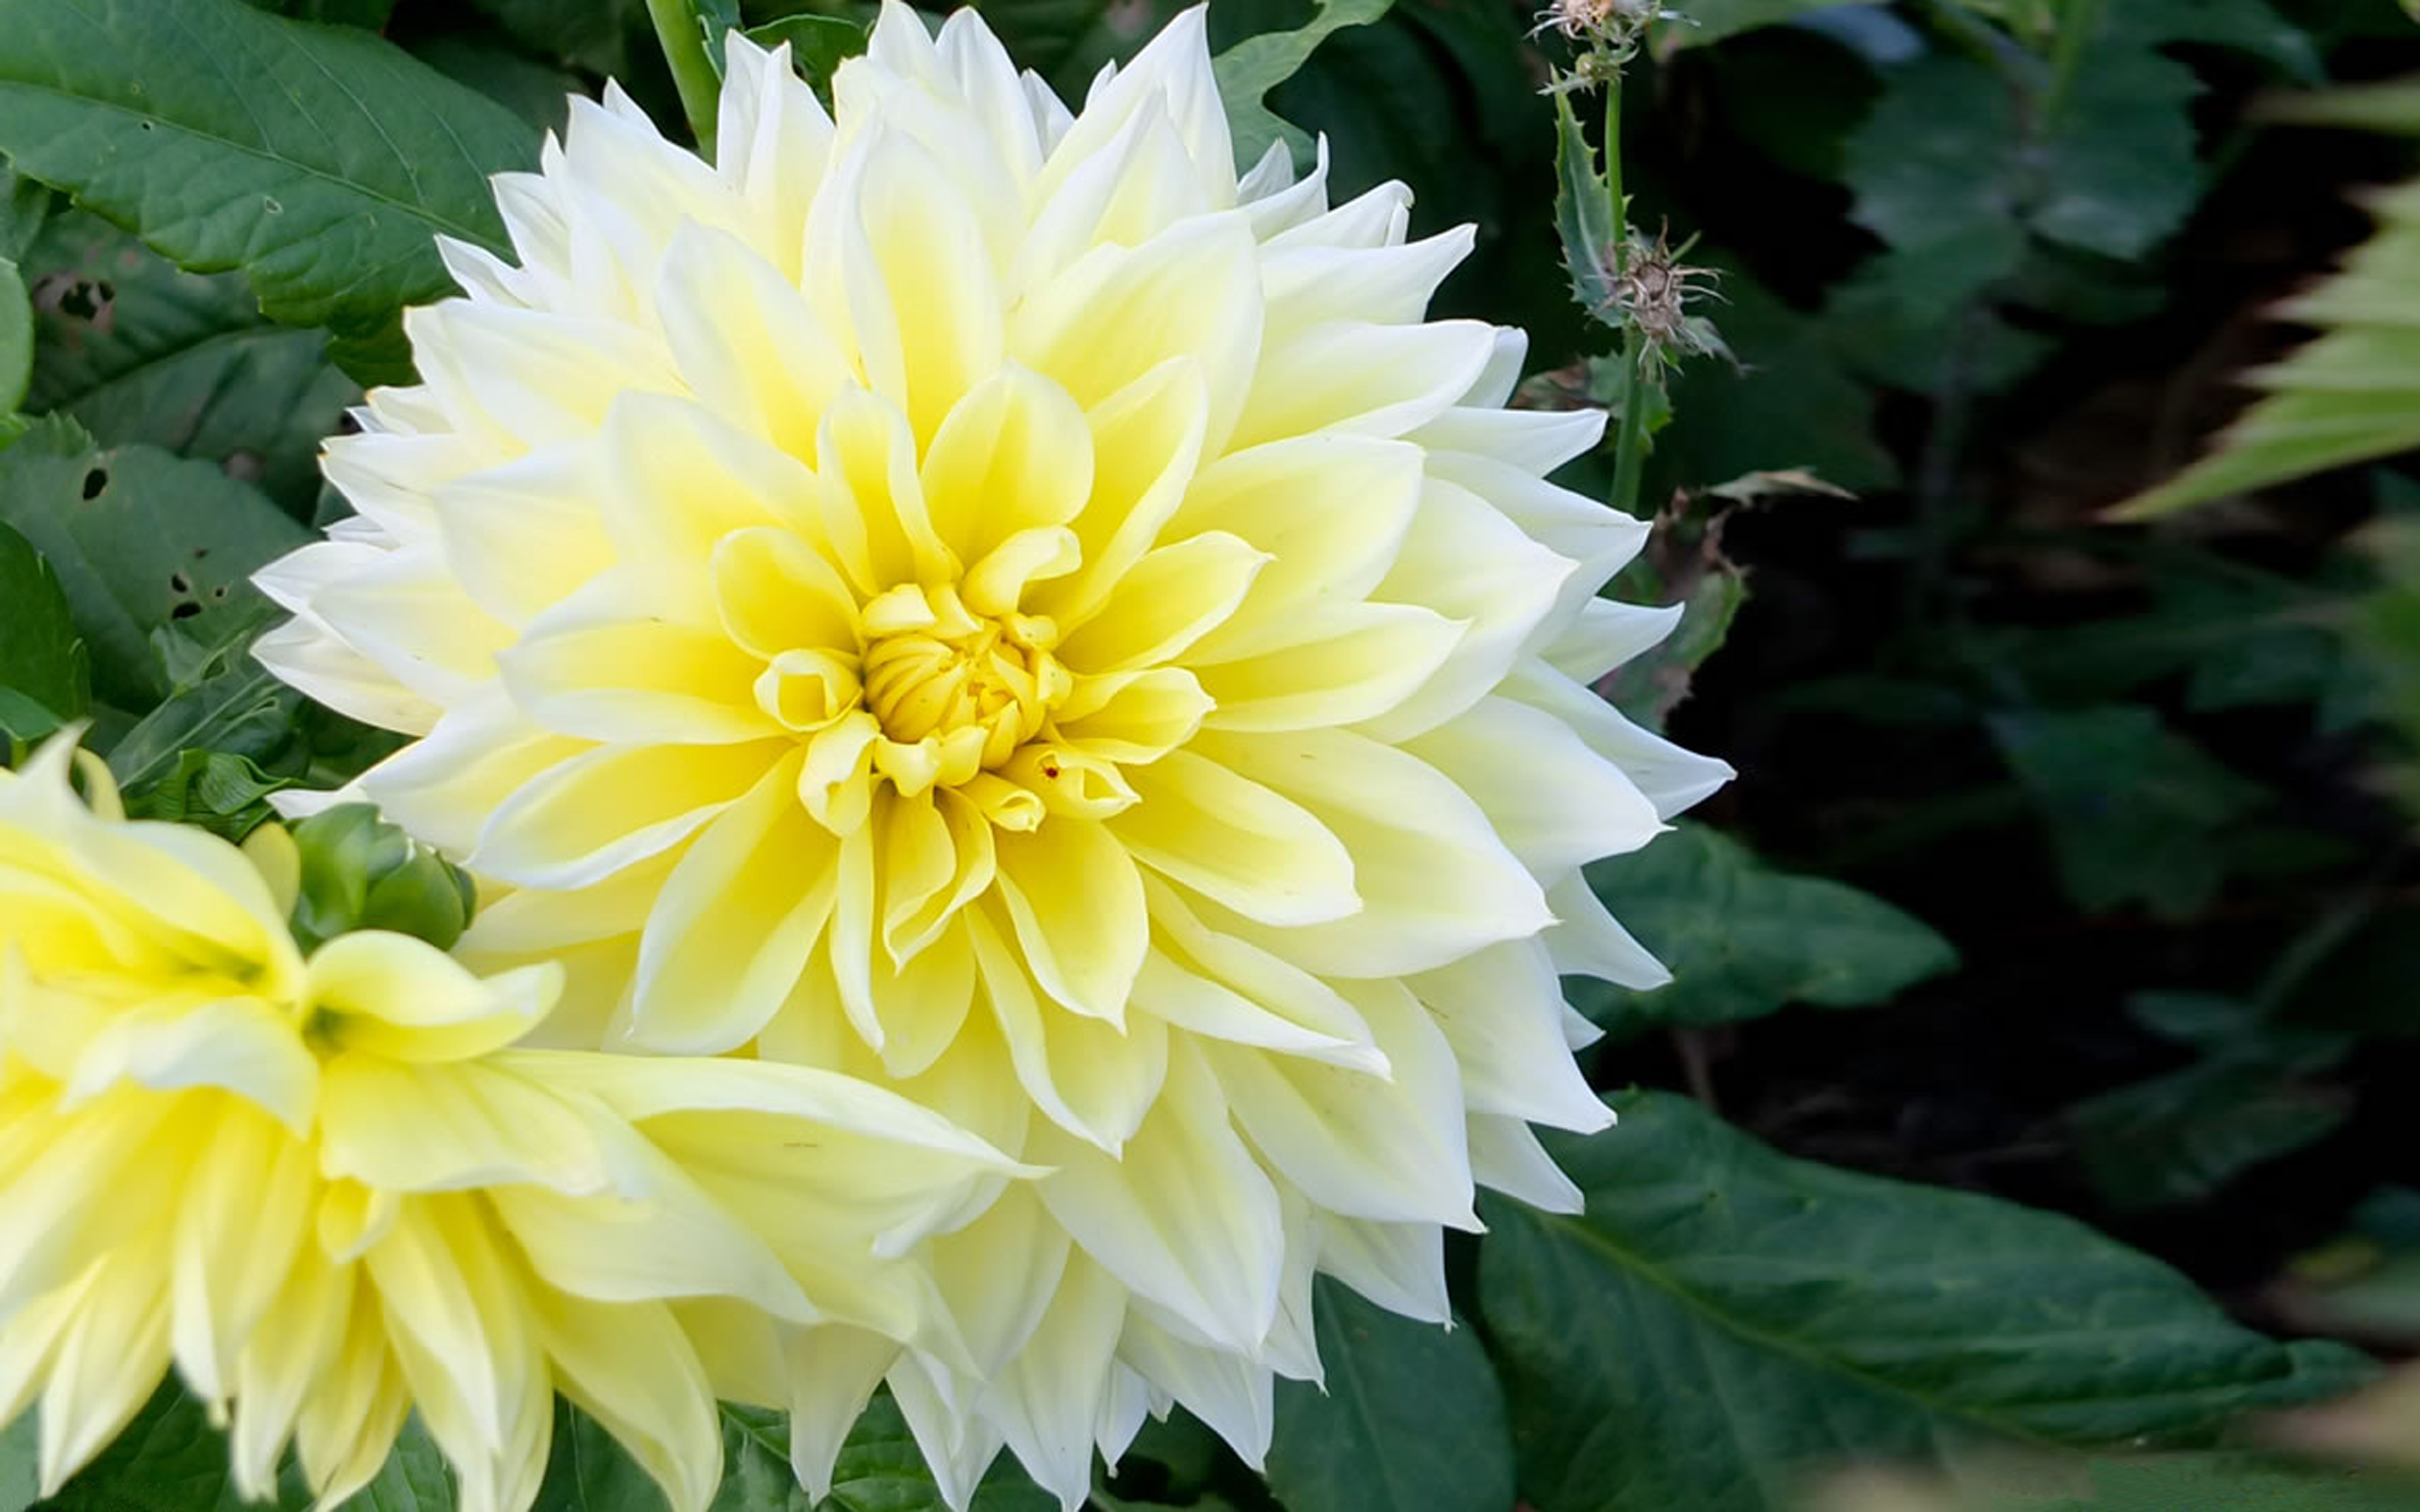 Dahlia Flowers White And Yellow Hd Wallpaper High Definition 1080p 4k Wide  169 And 1610 Free Download 3840x2400 : 